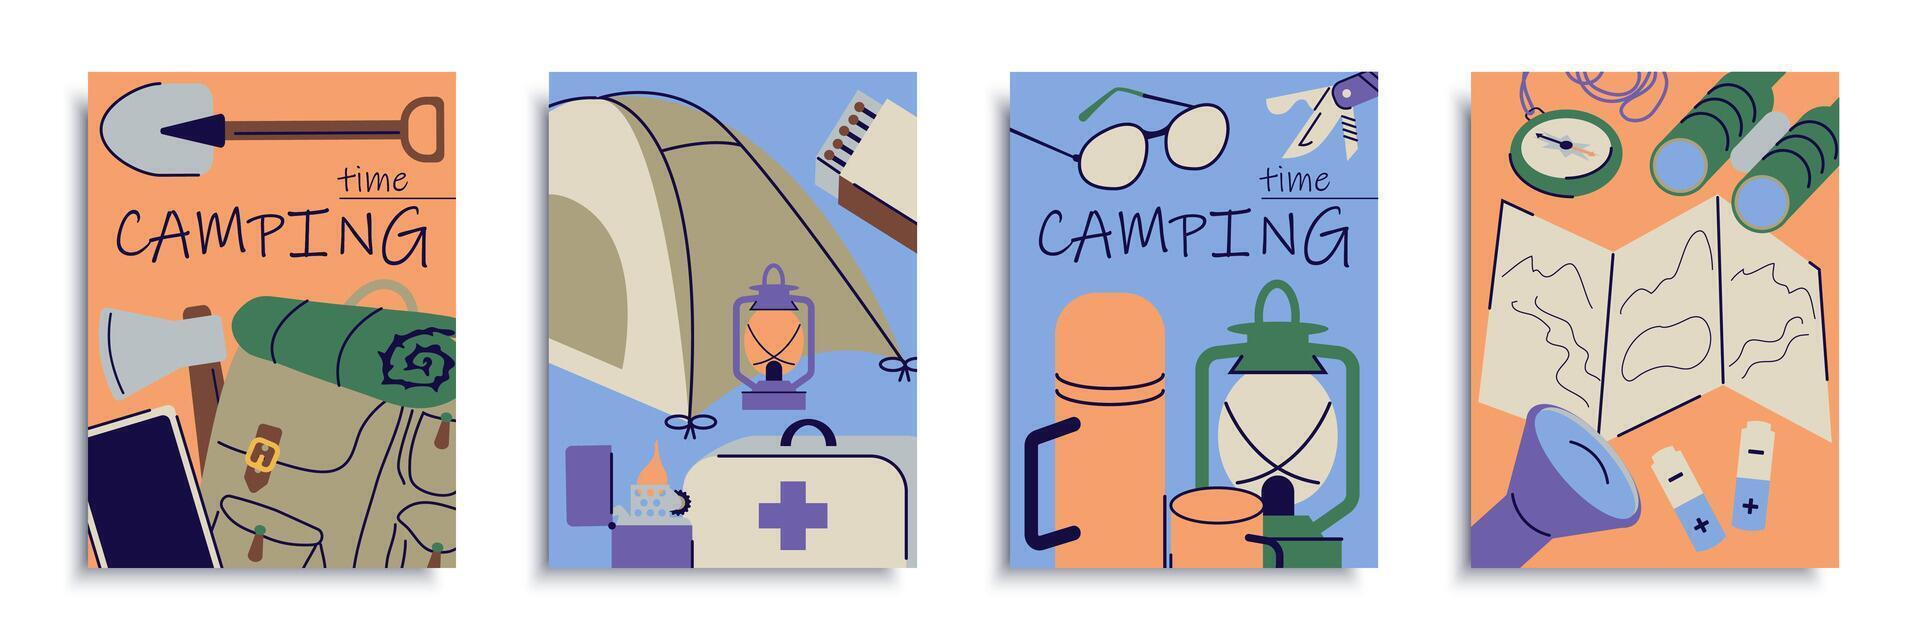 Camping time cover brochure set in flat design. Poster templates with touristic symbols, hiking route map, backpacks, campsite tent, flashlight, lantern, axe and other equipment. Vector illustration.